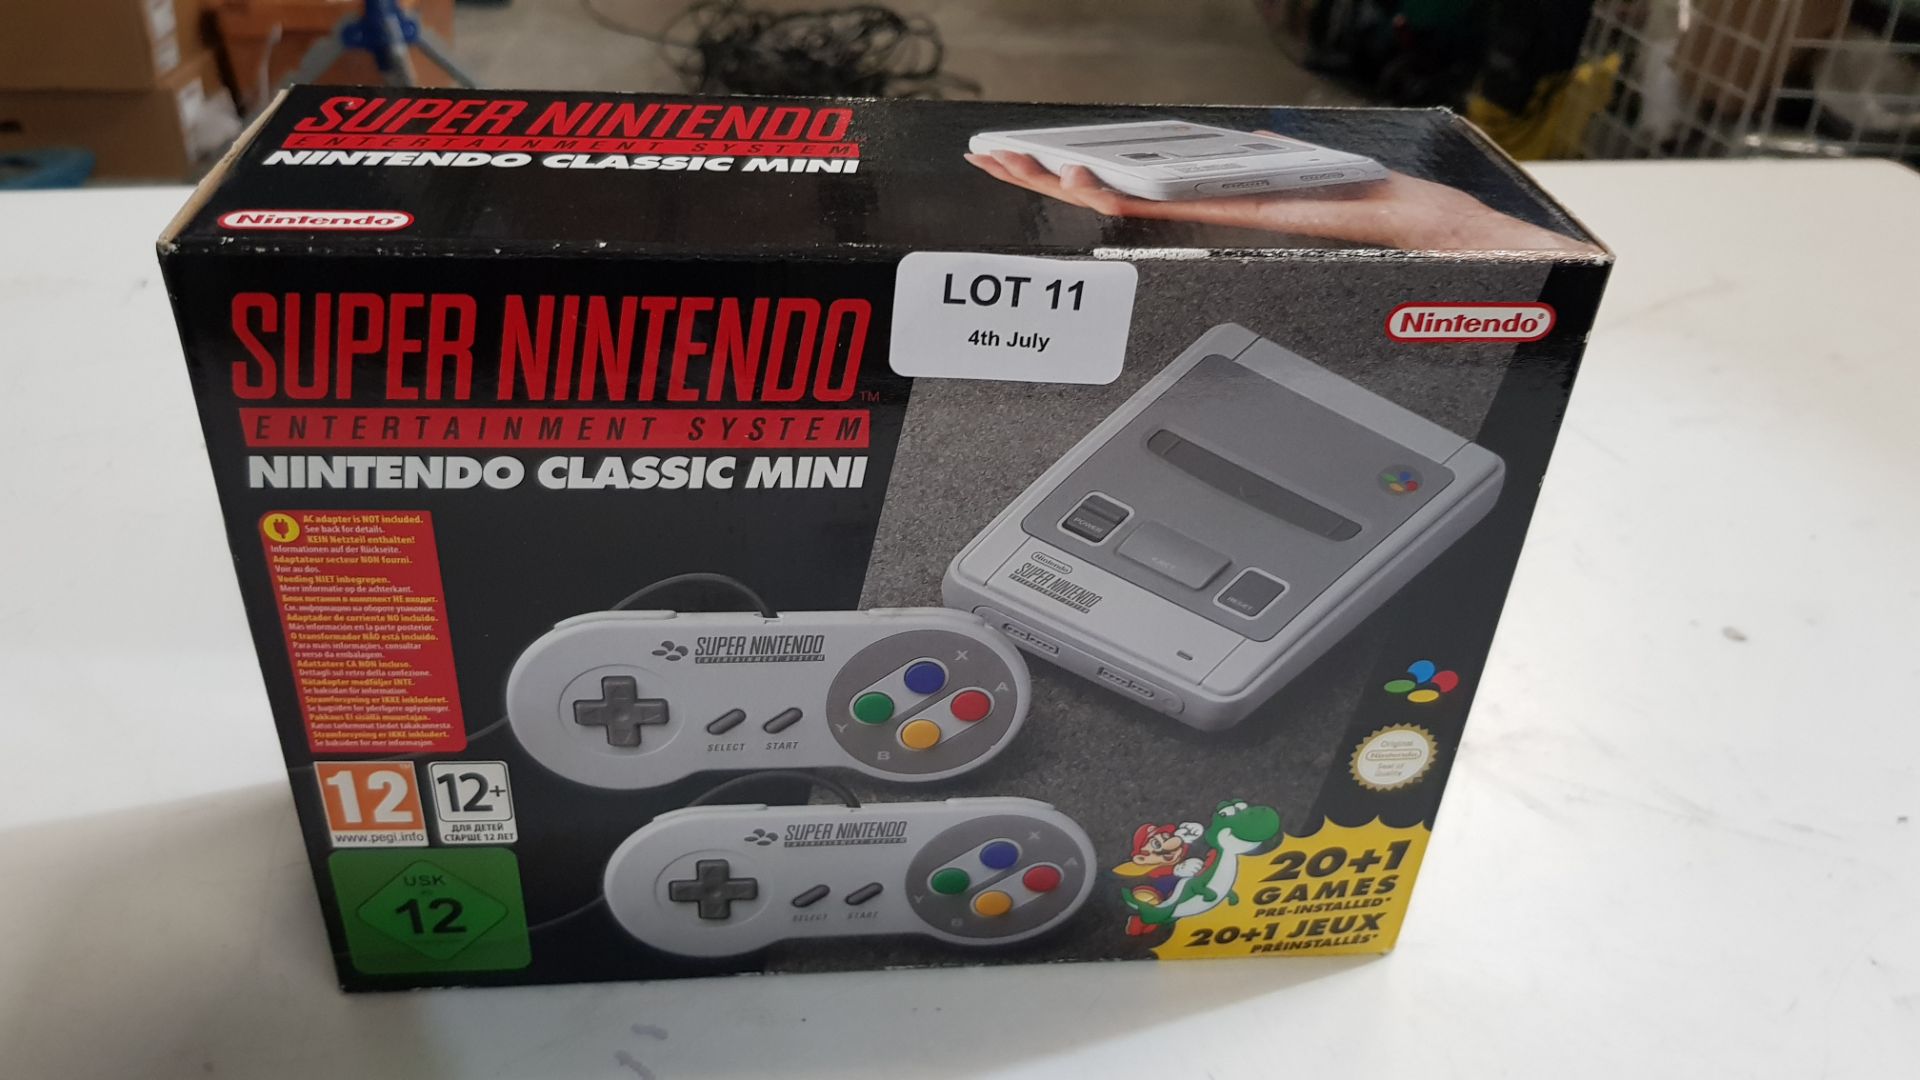 1x Super Nintendo Entertainment System Nintendo Classic Mini (Currently Selling For £250 On Amazon - Image 2 of 5